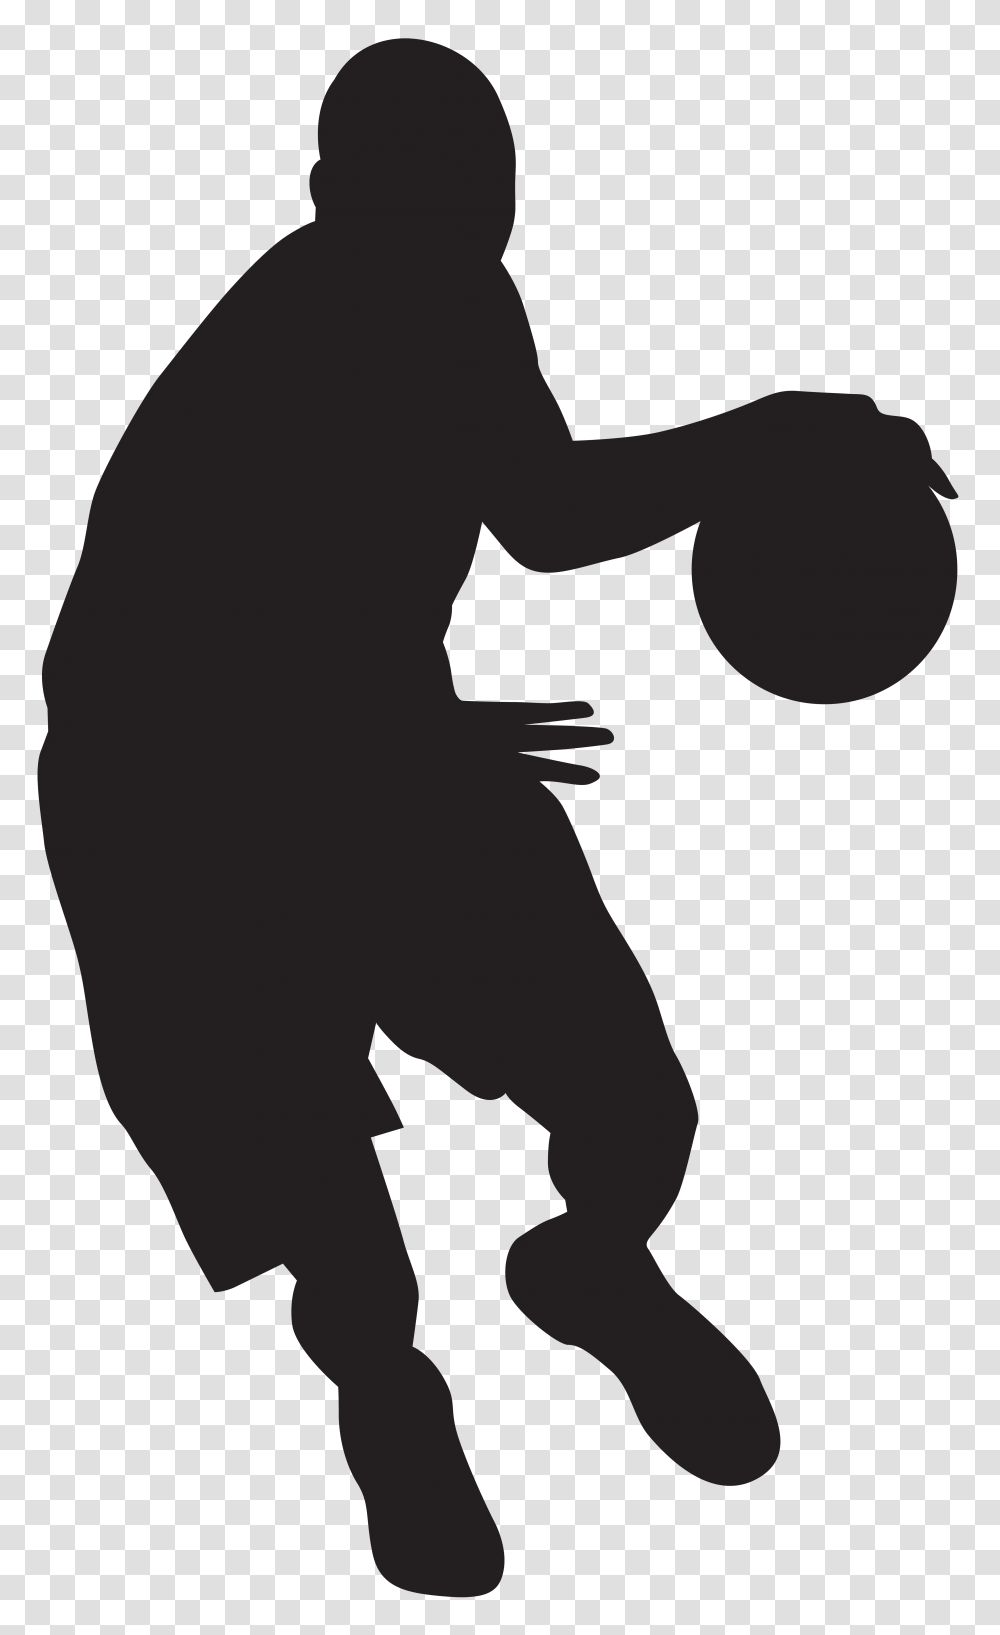 Basketball Player Silhouette Clip Basketball Player Silhouette, Clothing, Apparel, Sleeve, T-Shirt Transparent Png